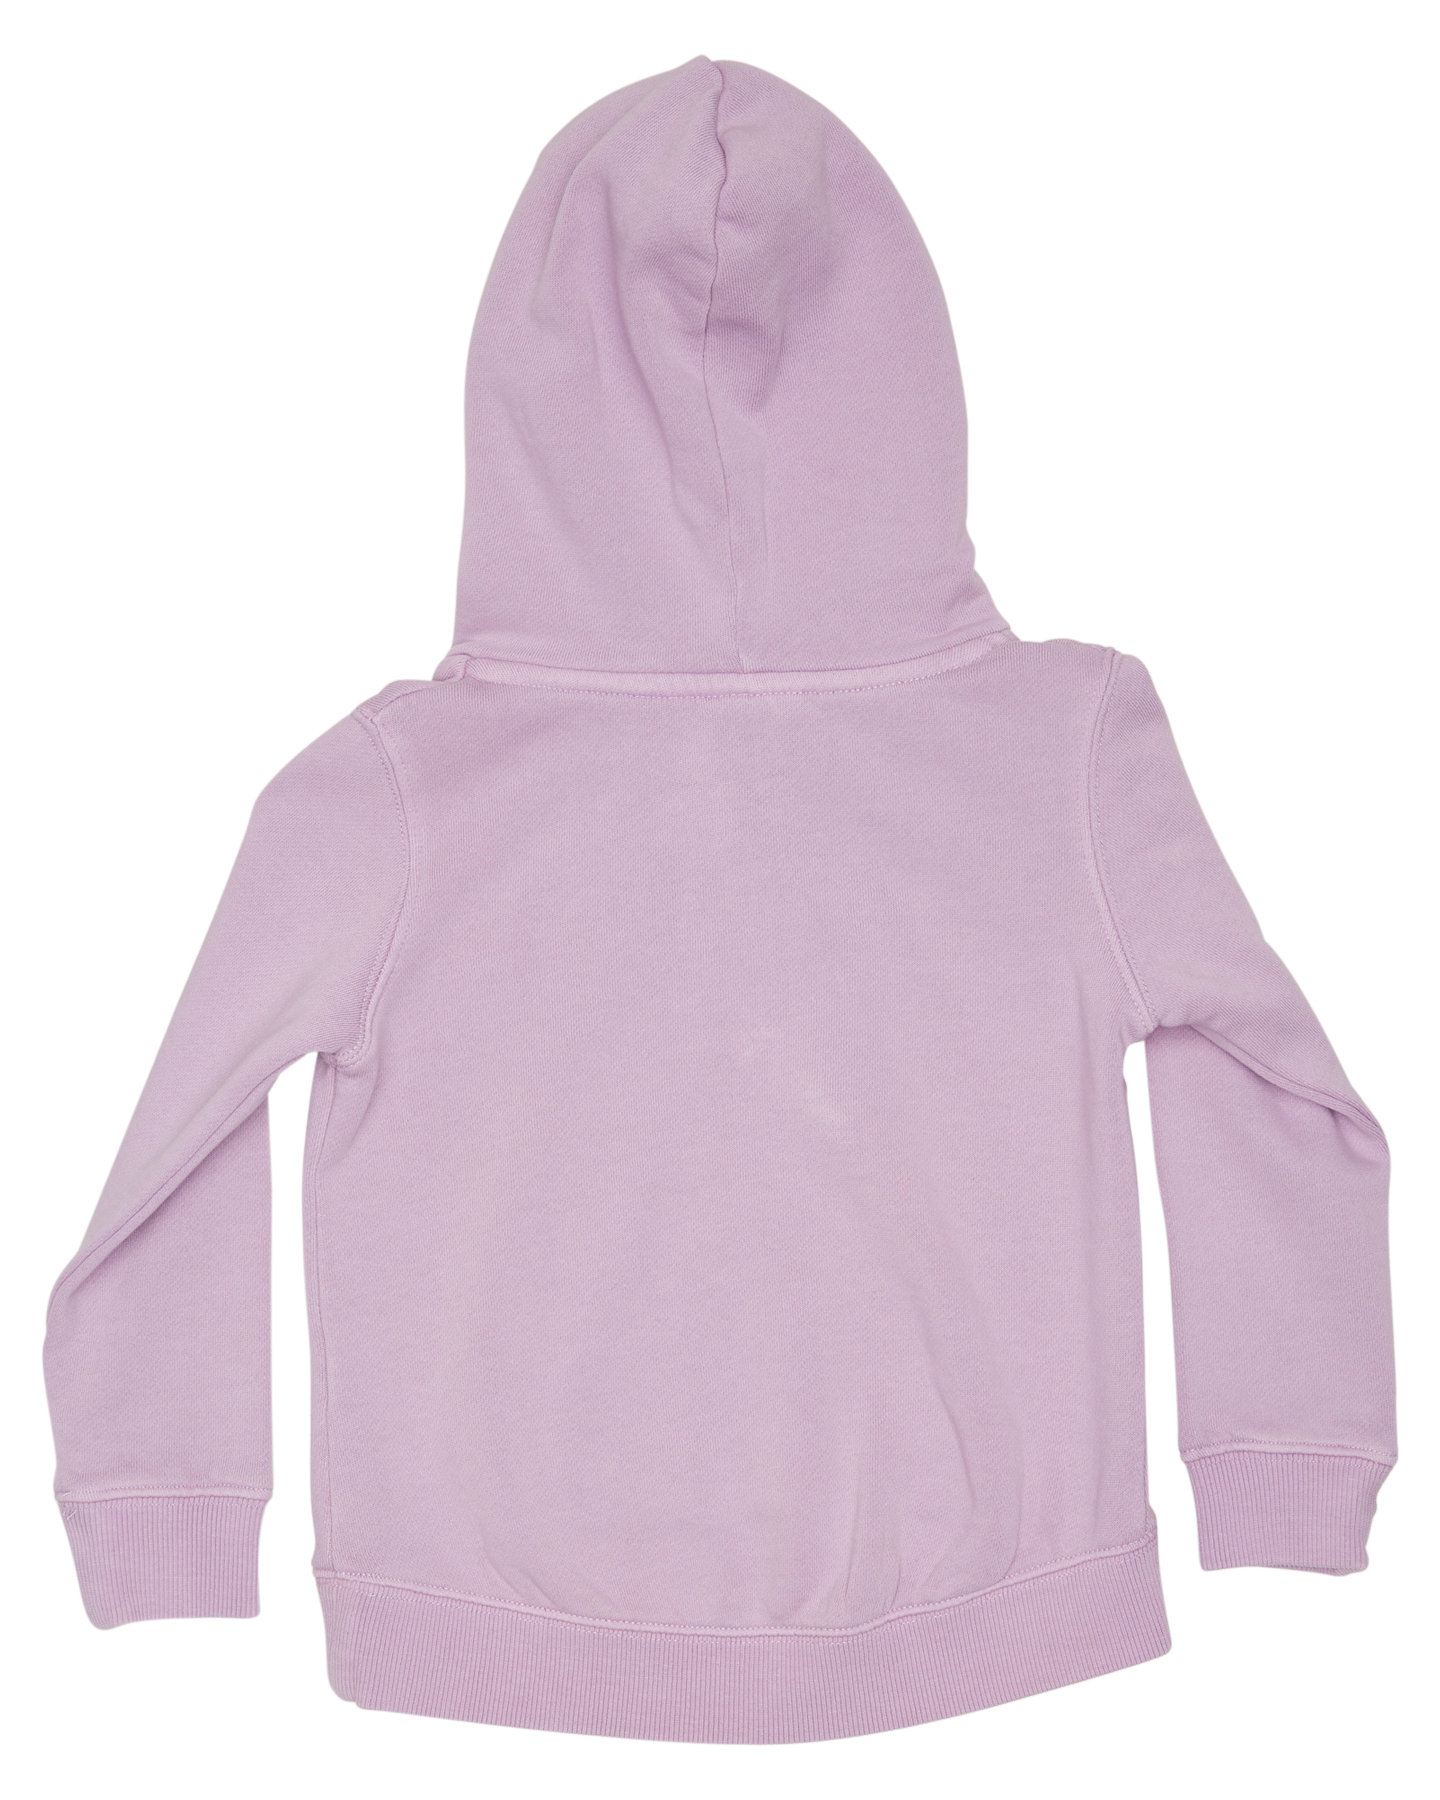 Eves Sister Girls Sister Hoody - Kids - Lilac | SurfStitch